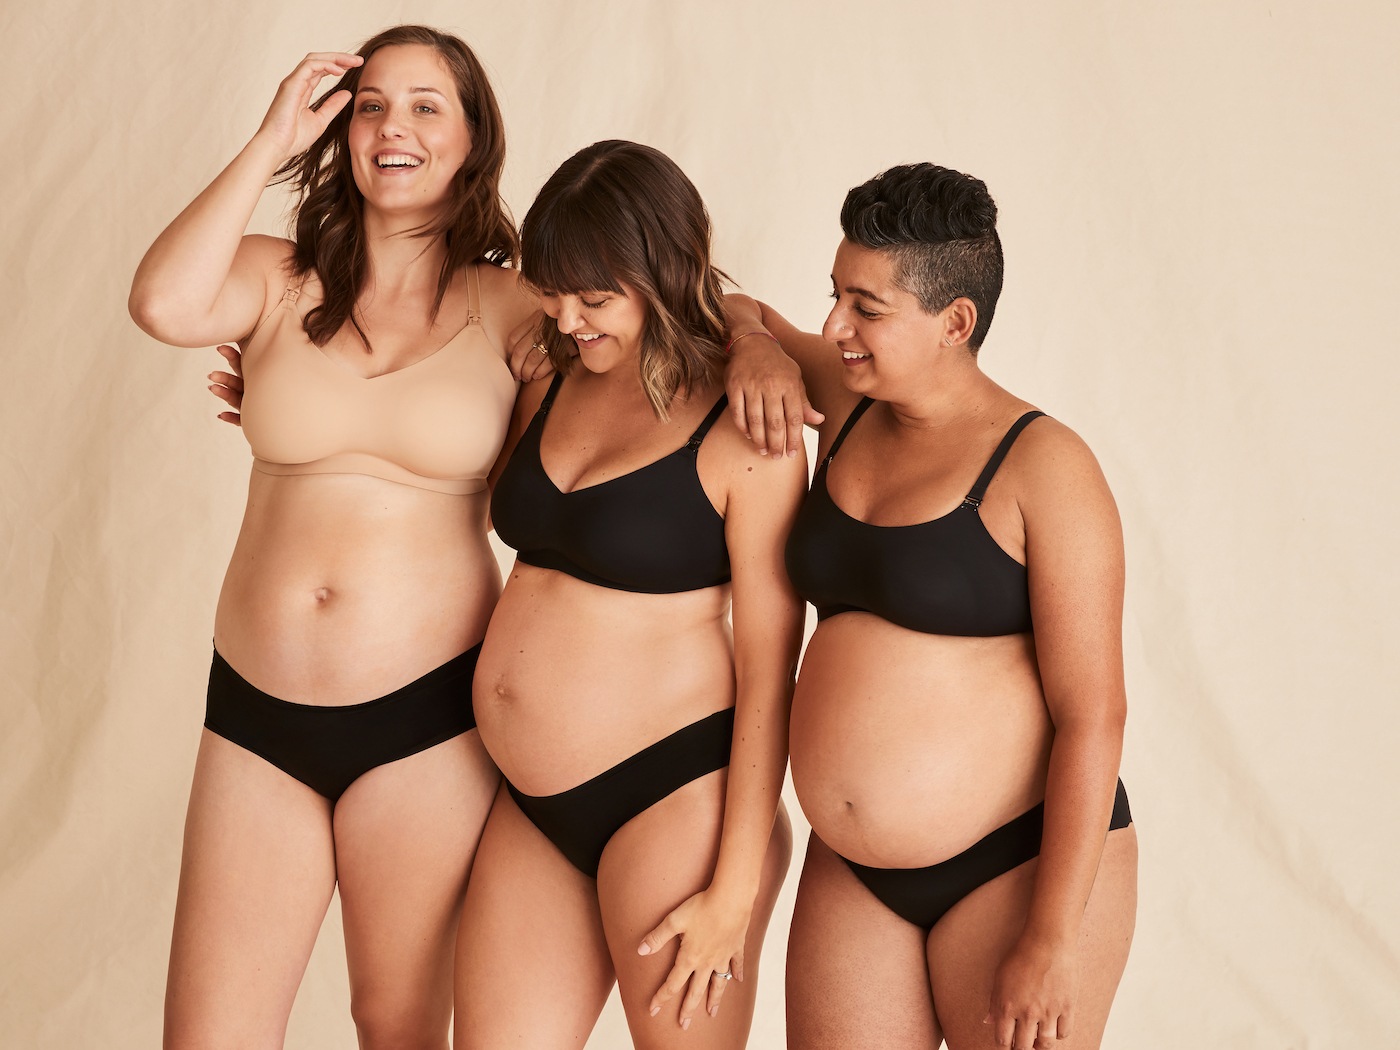 Postpartum Disposable Underwear by Party Panties, the memo